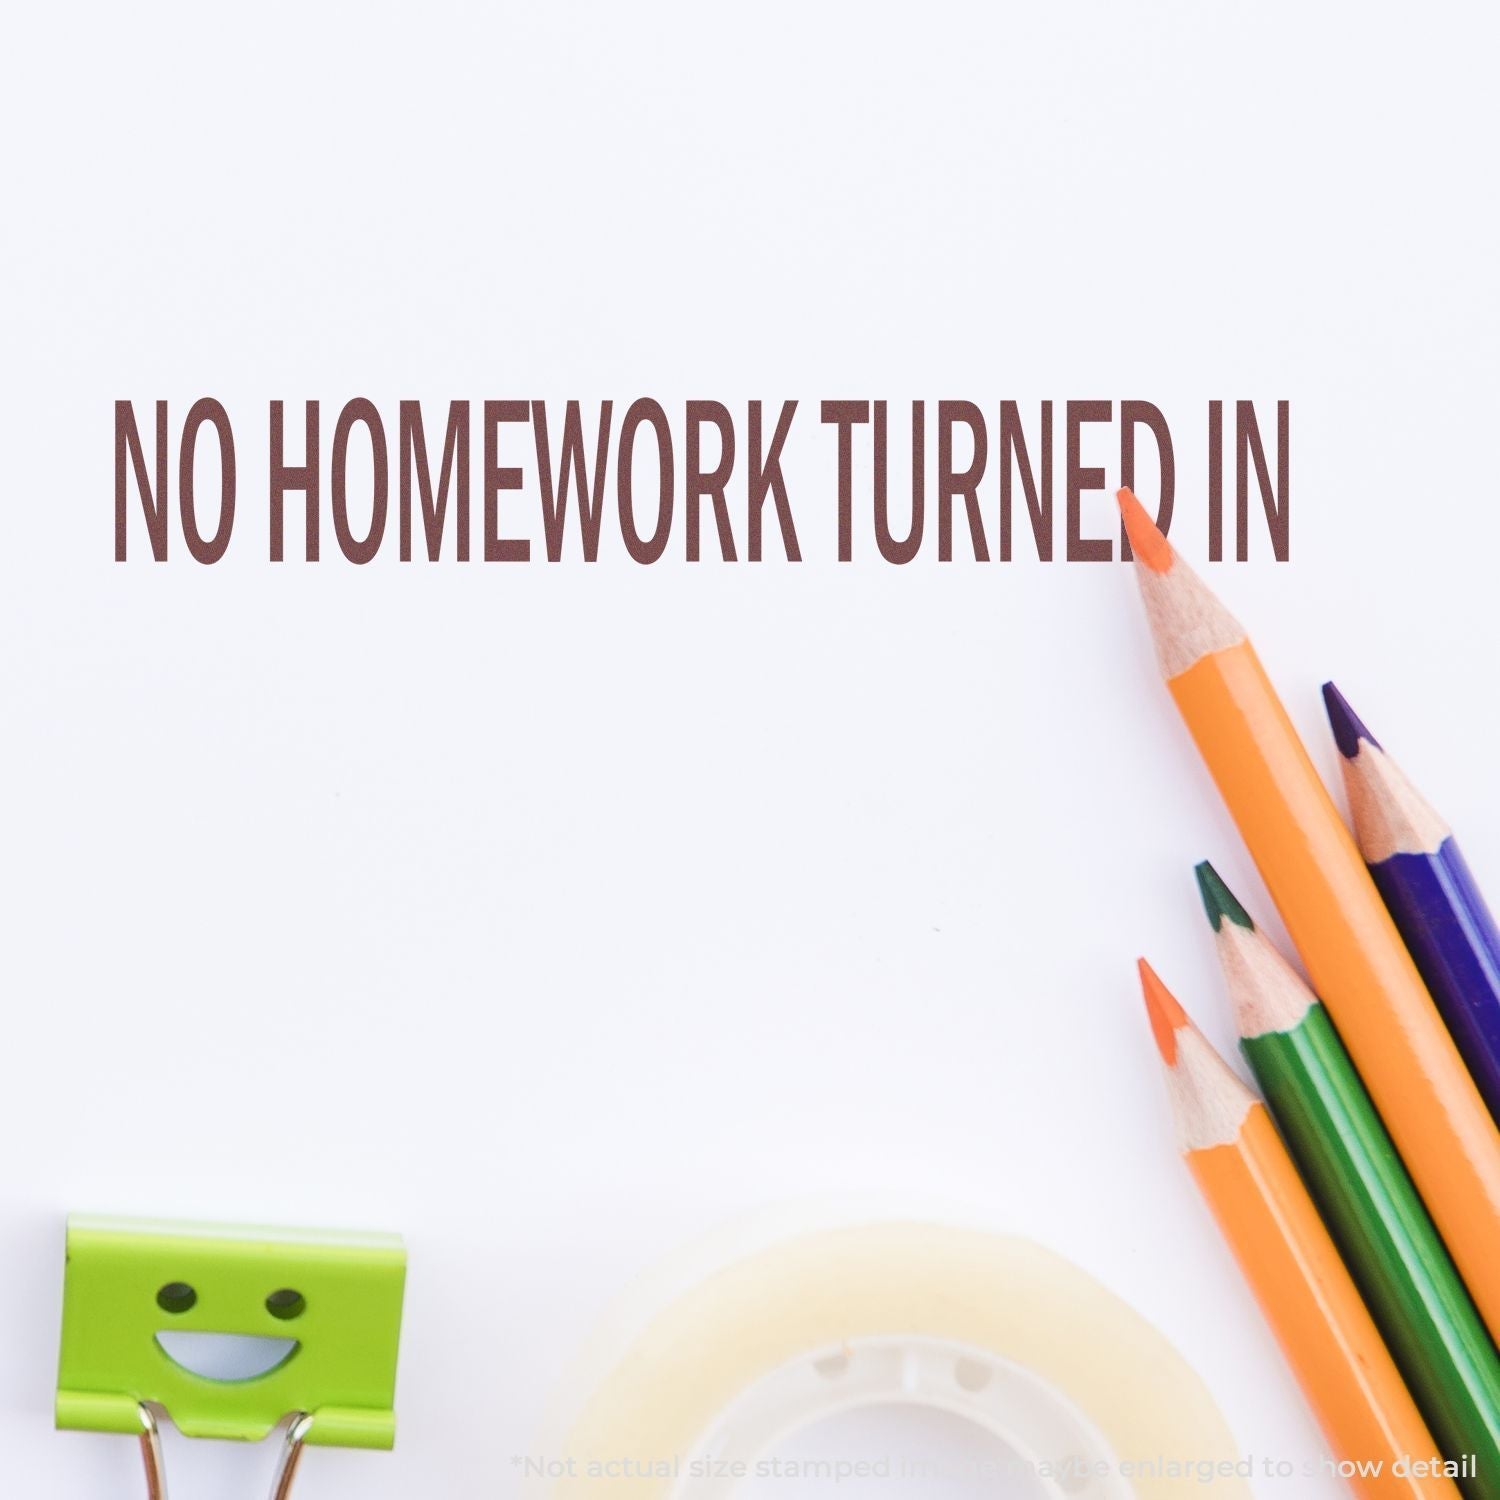 A self-inking stamp with a stamped image showing how the text "NO HOMEWORK TURNED IN" is displayed after stamping.